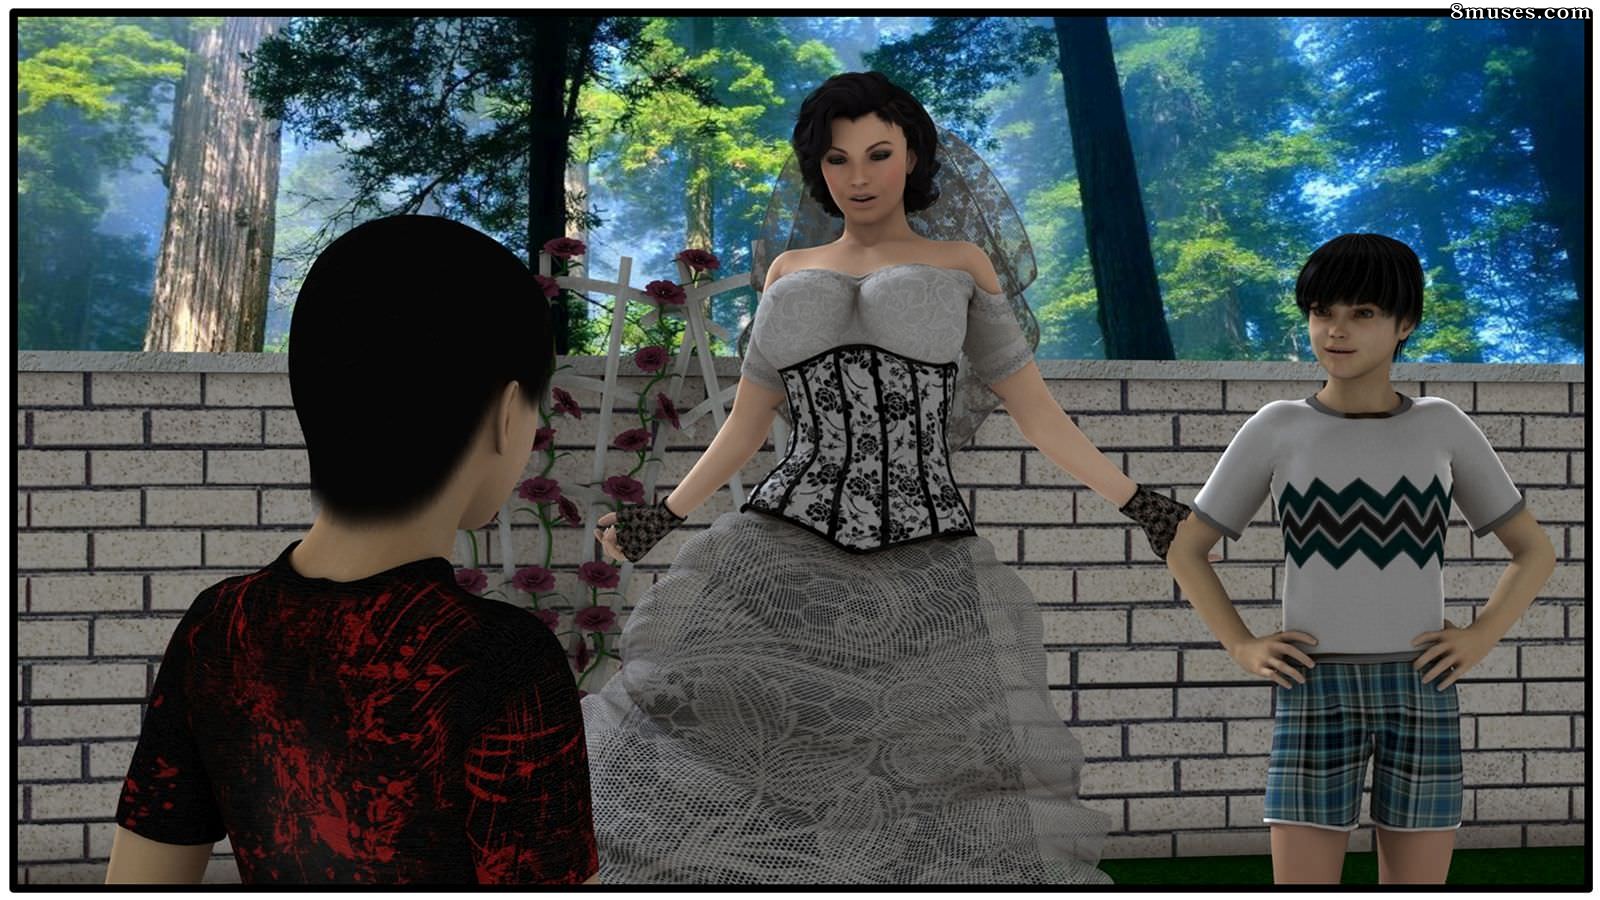 Boys 3d comics. The Conflict комикс часть 2. The Conflict комикс. Комикс - ma boy (your son is my husband. The Conflict 1 комикс.